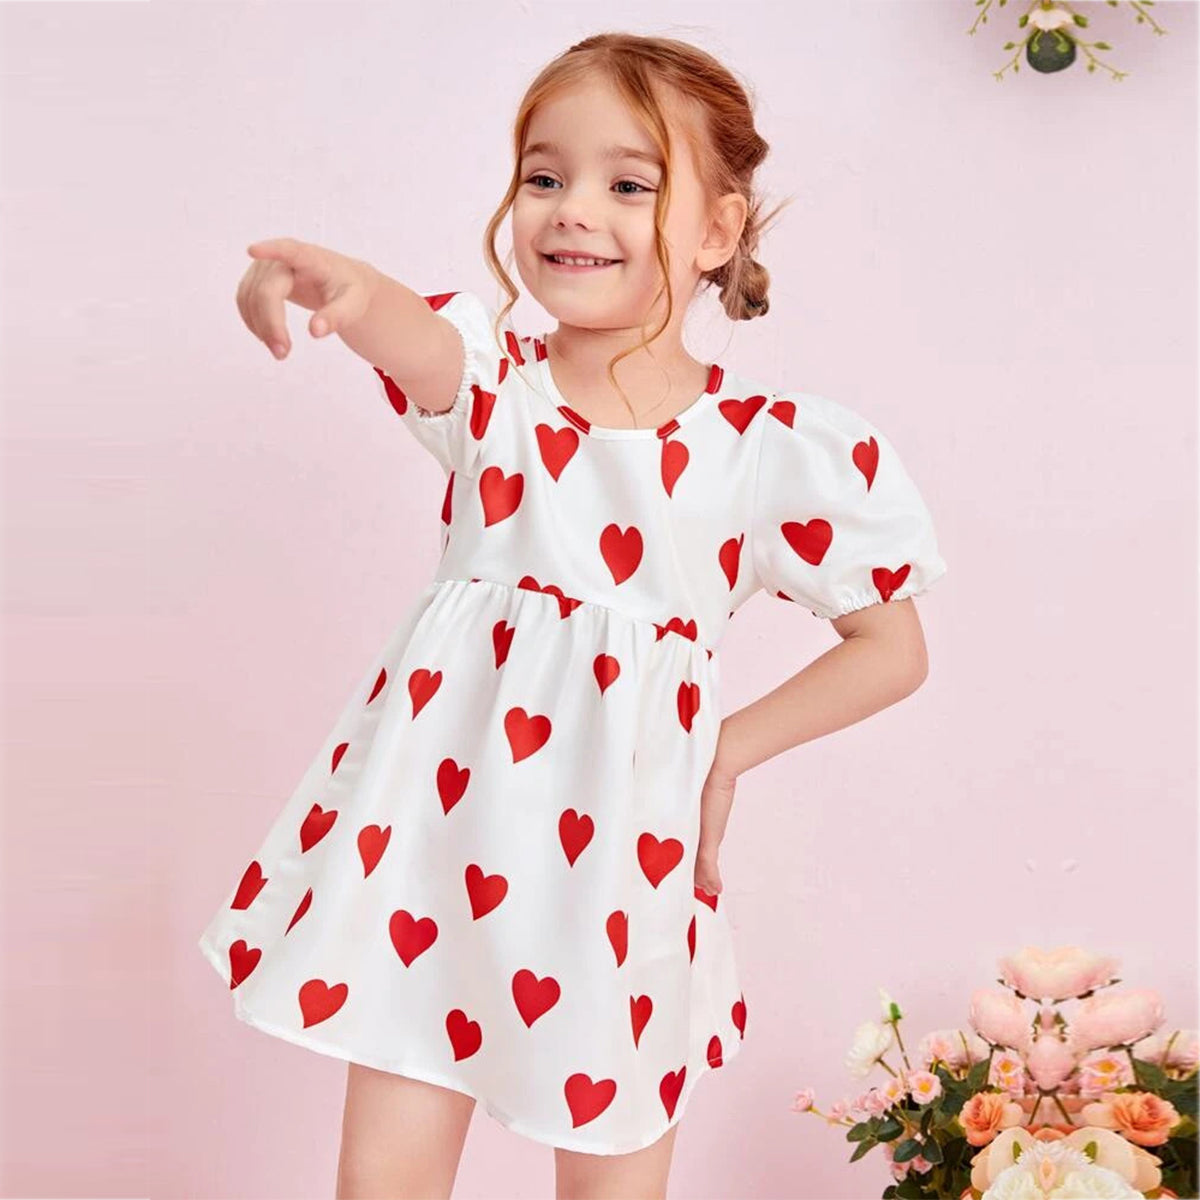 Kids New Fashion White_Heart Frock&Dress for Baby Girls.